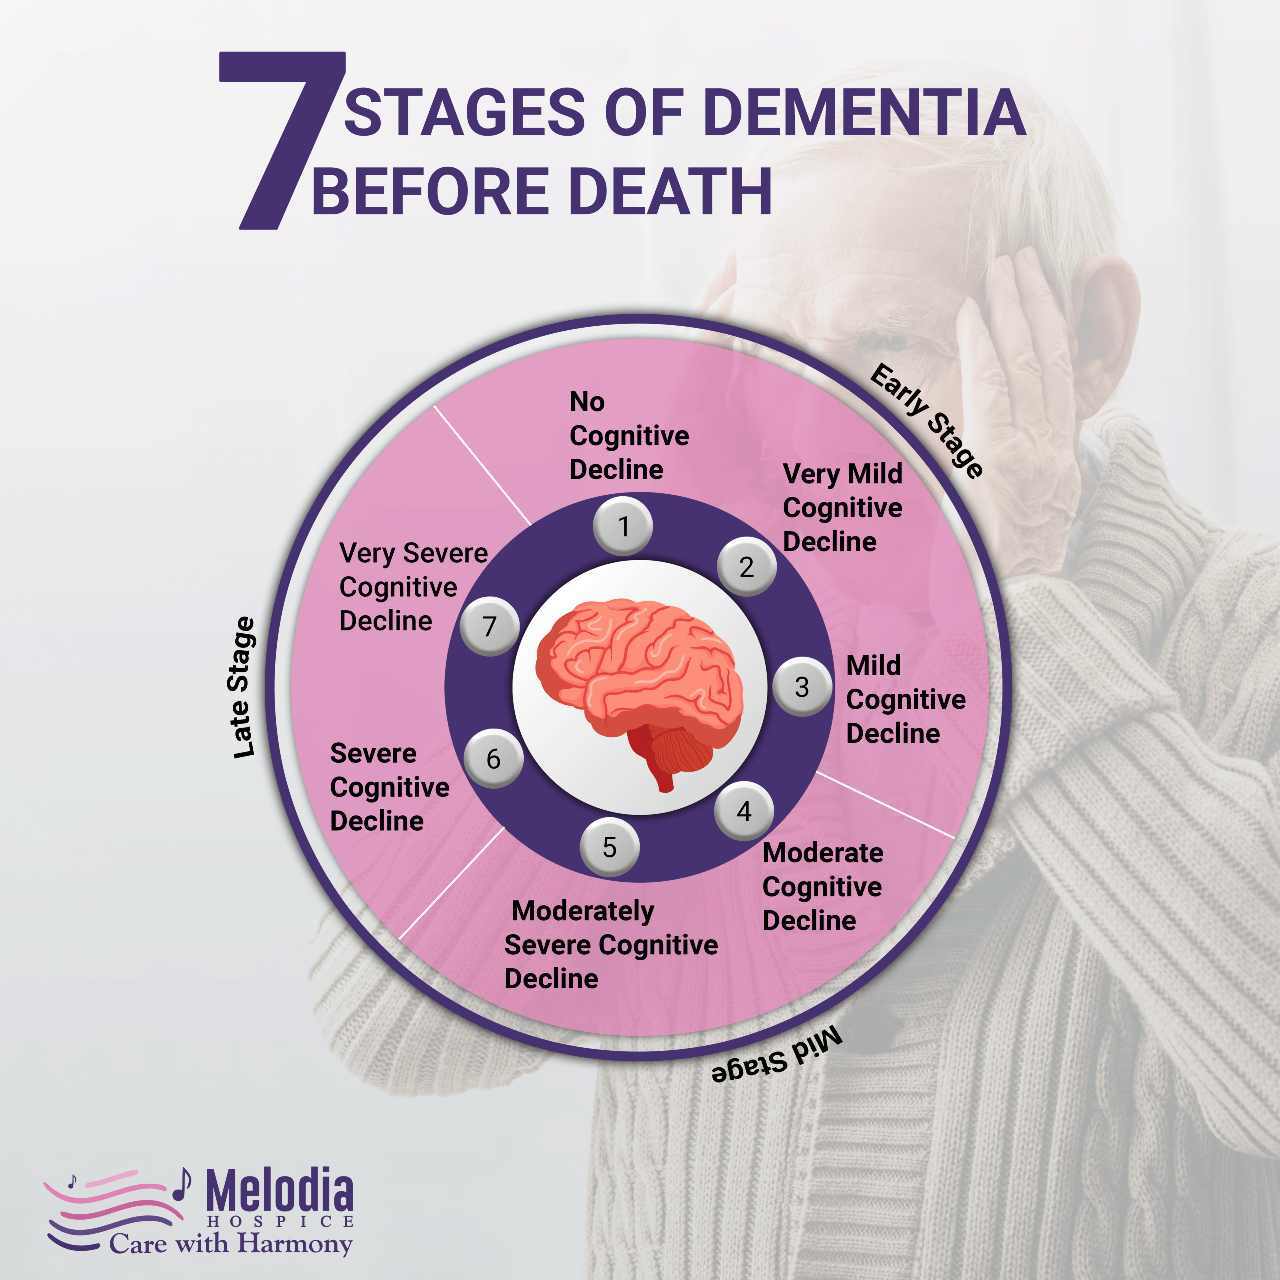 Infographic illustrating the 7 stages of dementia before death